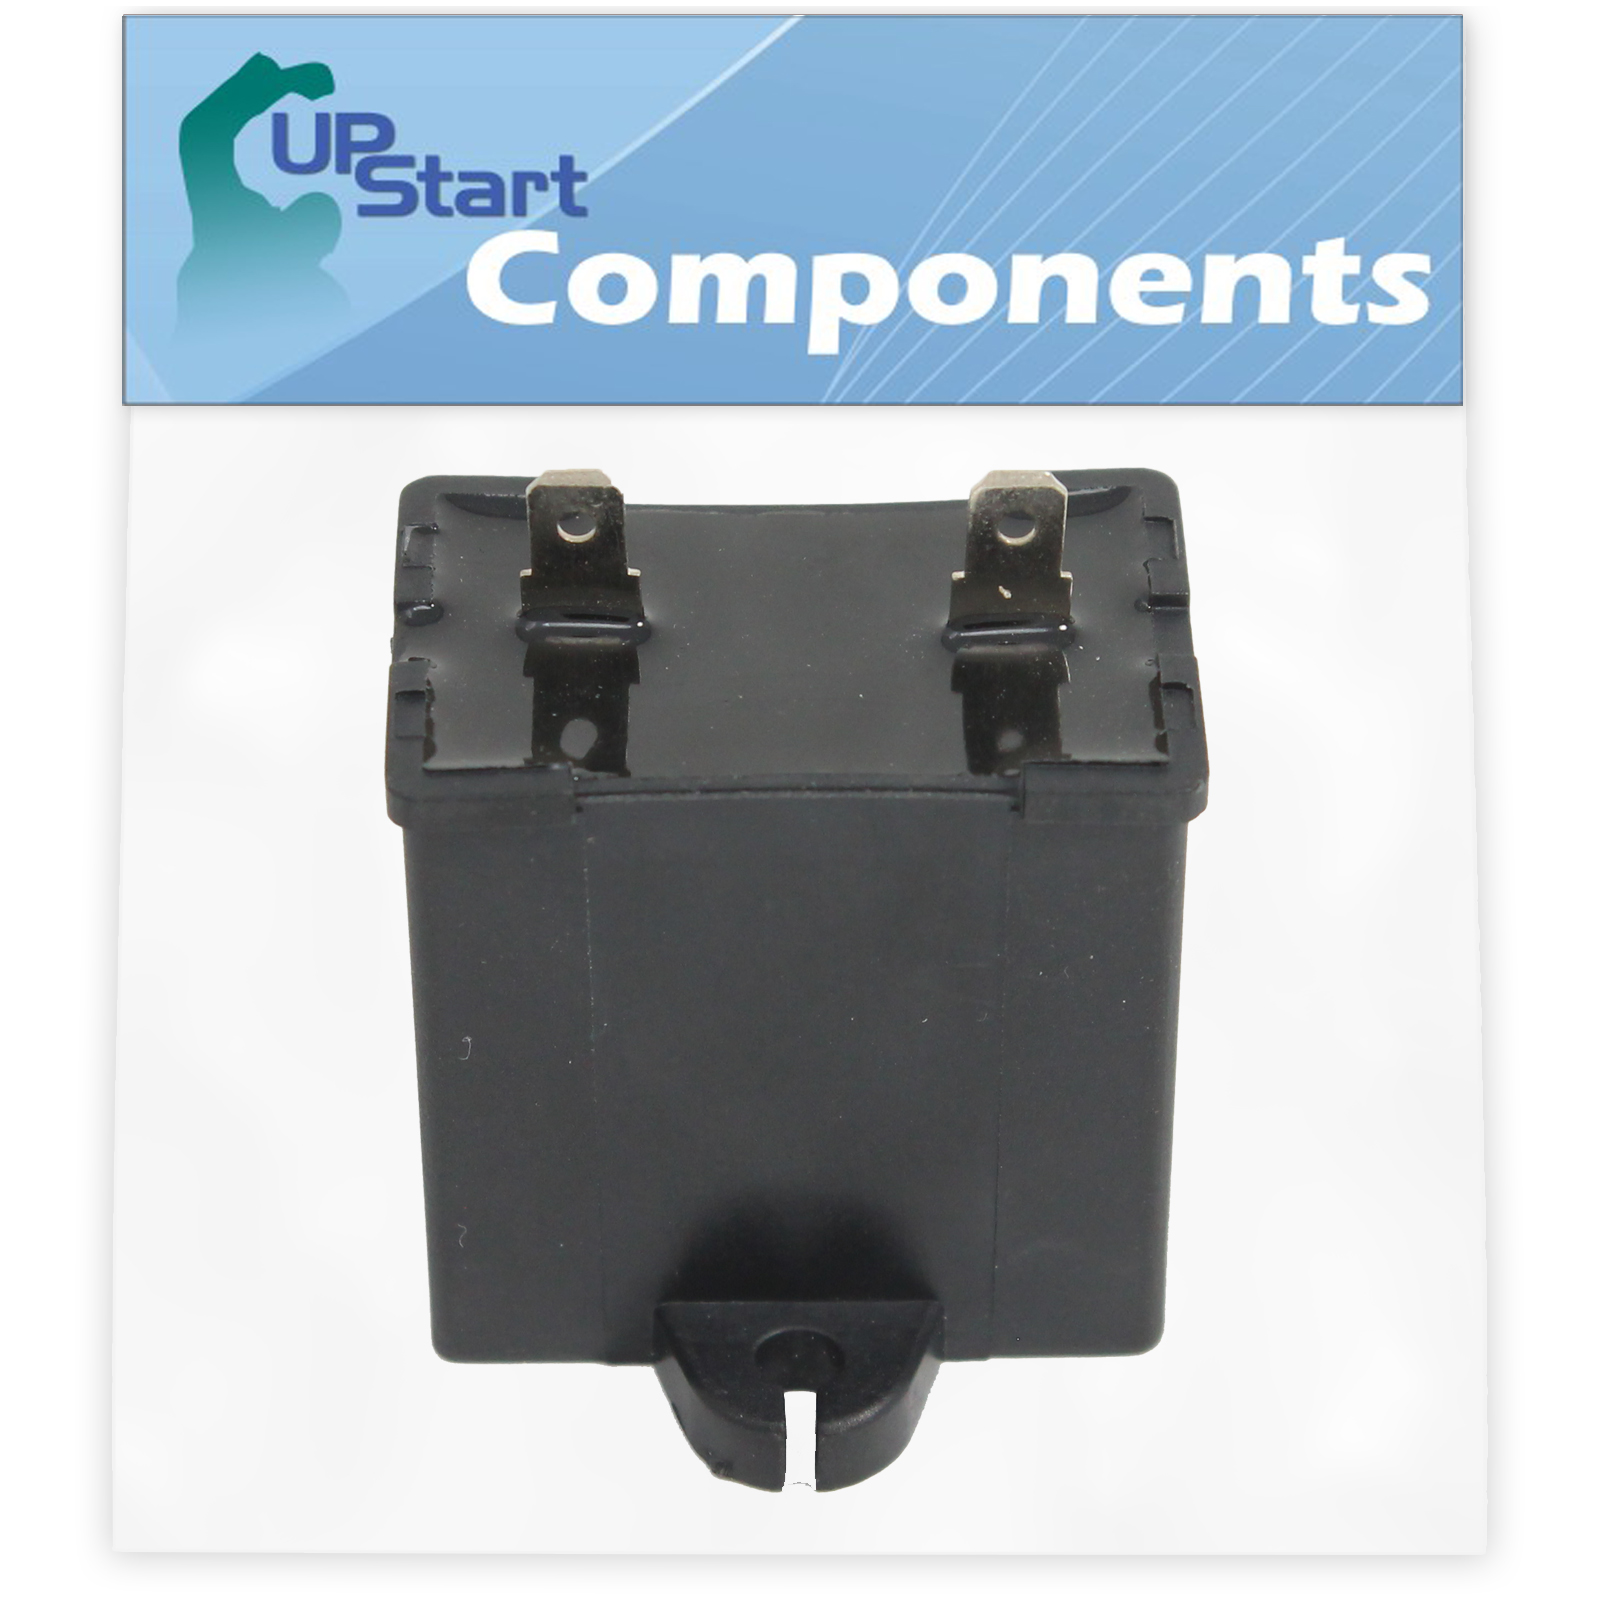 W10662129 Refrigerator and Freezer Compressor Run Capacitor Replacement for Whirlpool WRT779REYB00 Refrigerator - Compatible with 2169373 WPW10662129 Run Capacitor - UpStart Components Brand - image 1 of 4